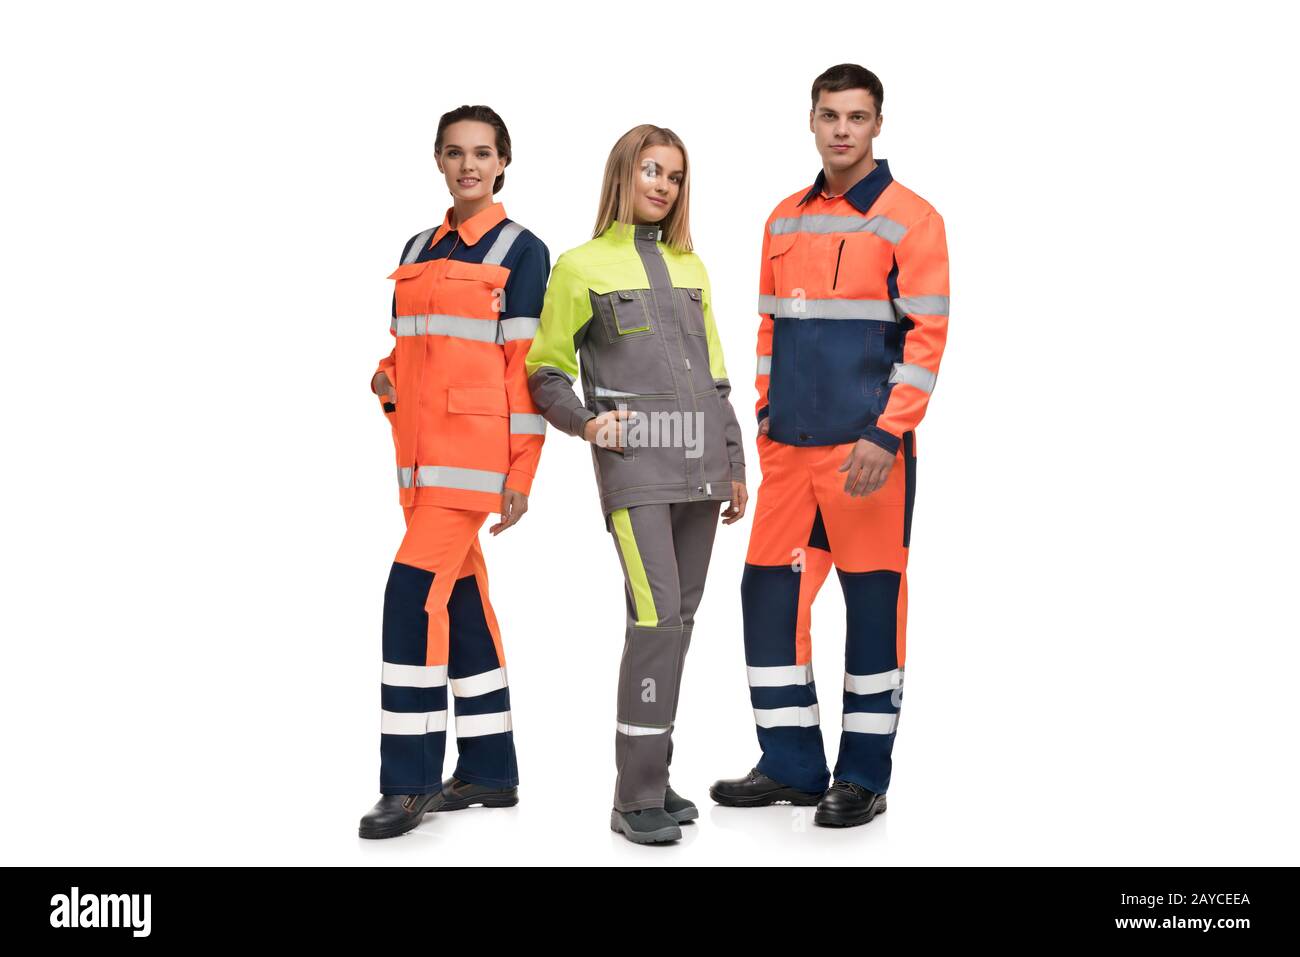 work clothes for young women